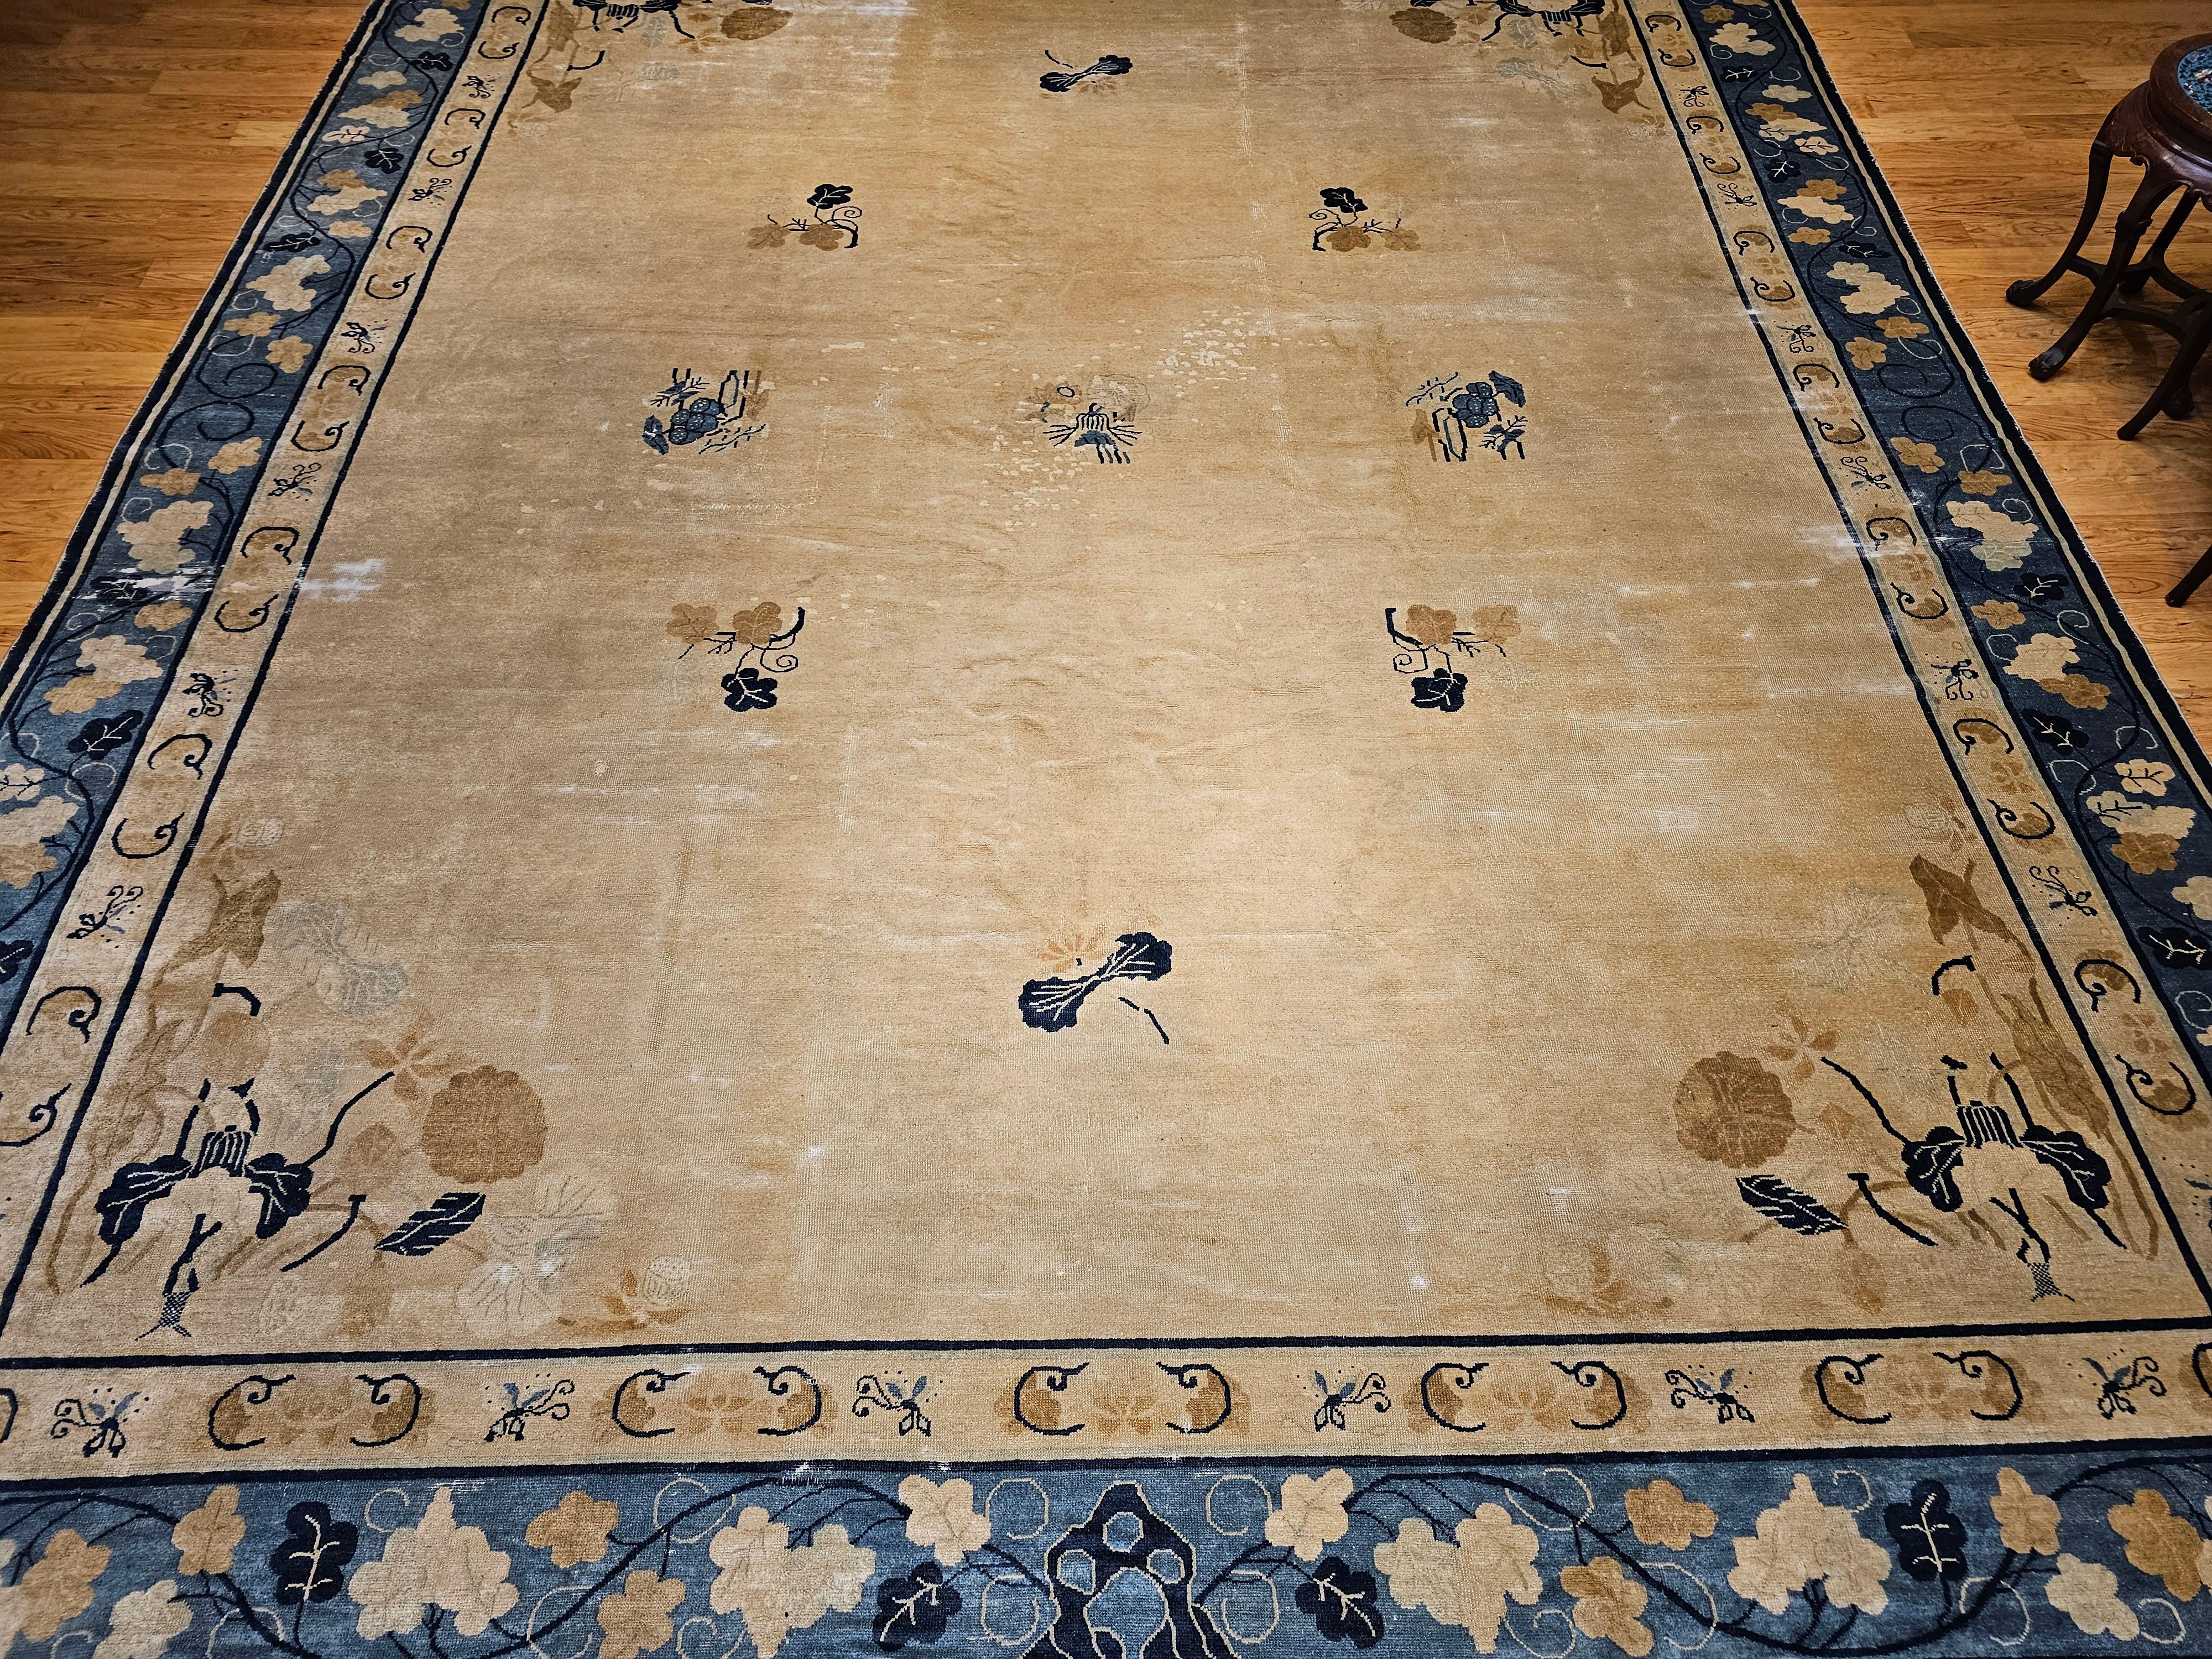 19th Century Oversized Chinese Peking Rug in Wheat, Navy, Brown, Green, Sky-Blue For Sale 6